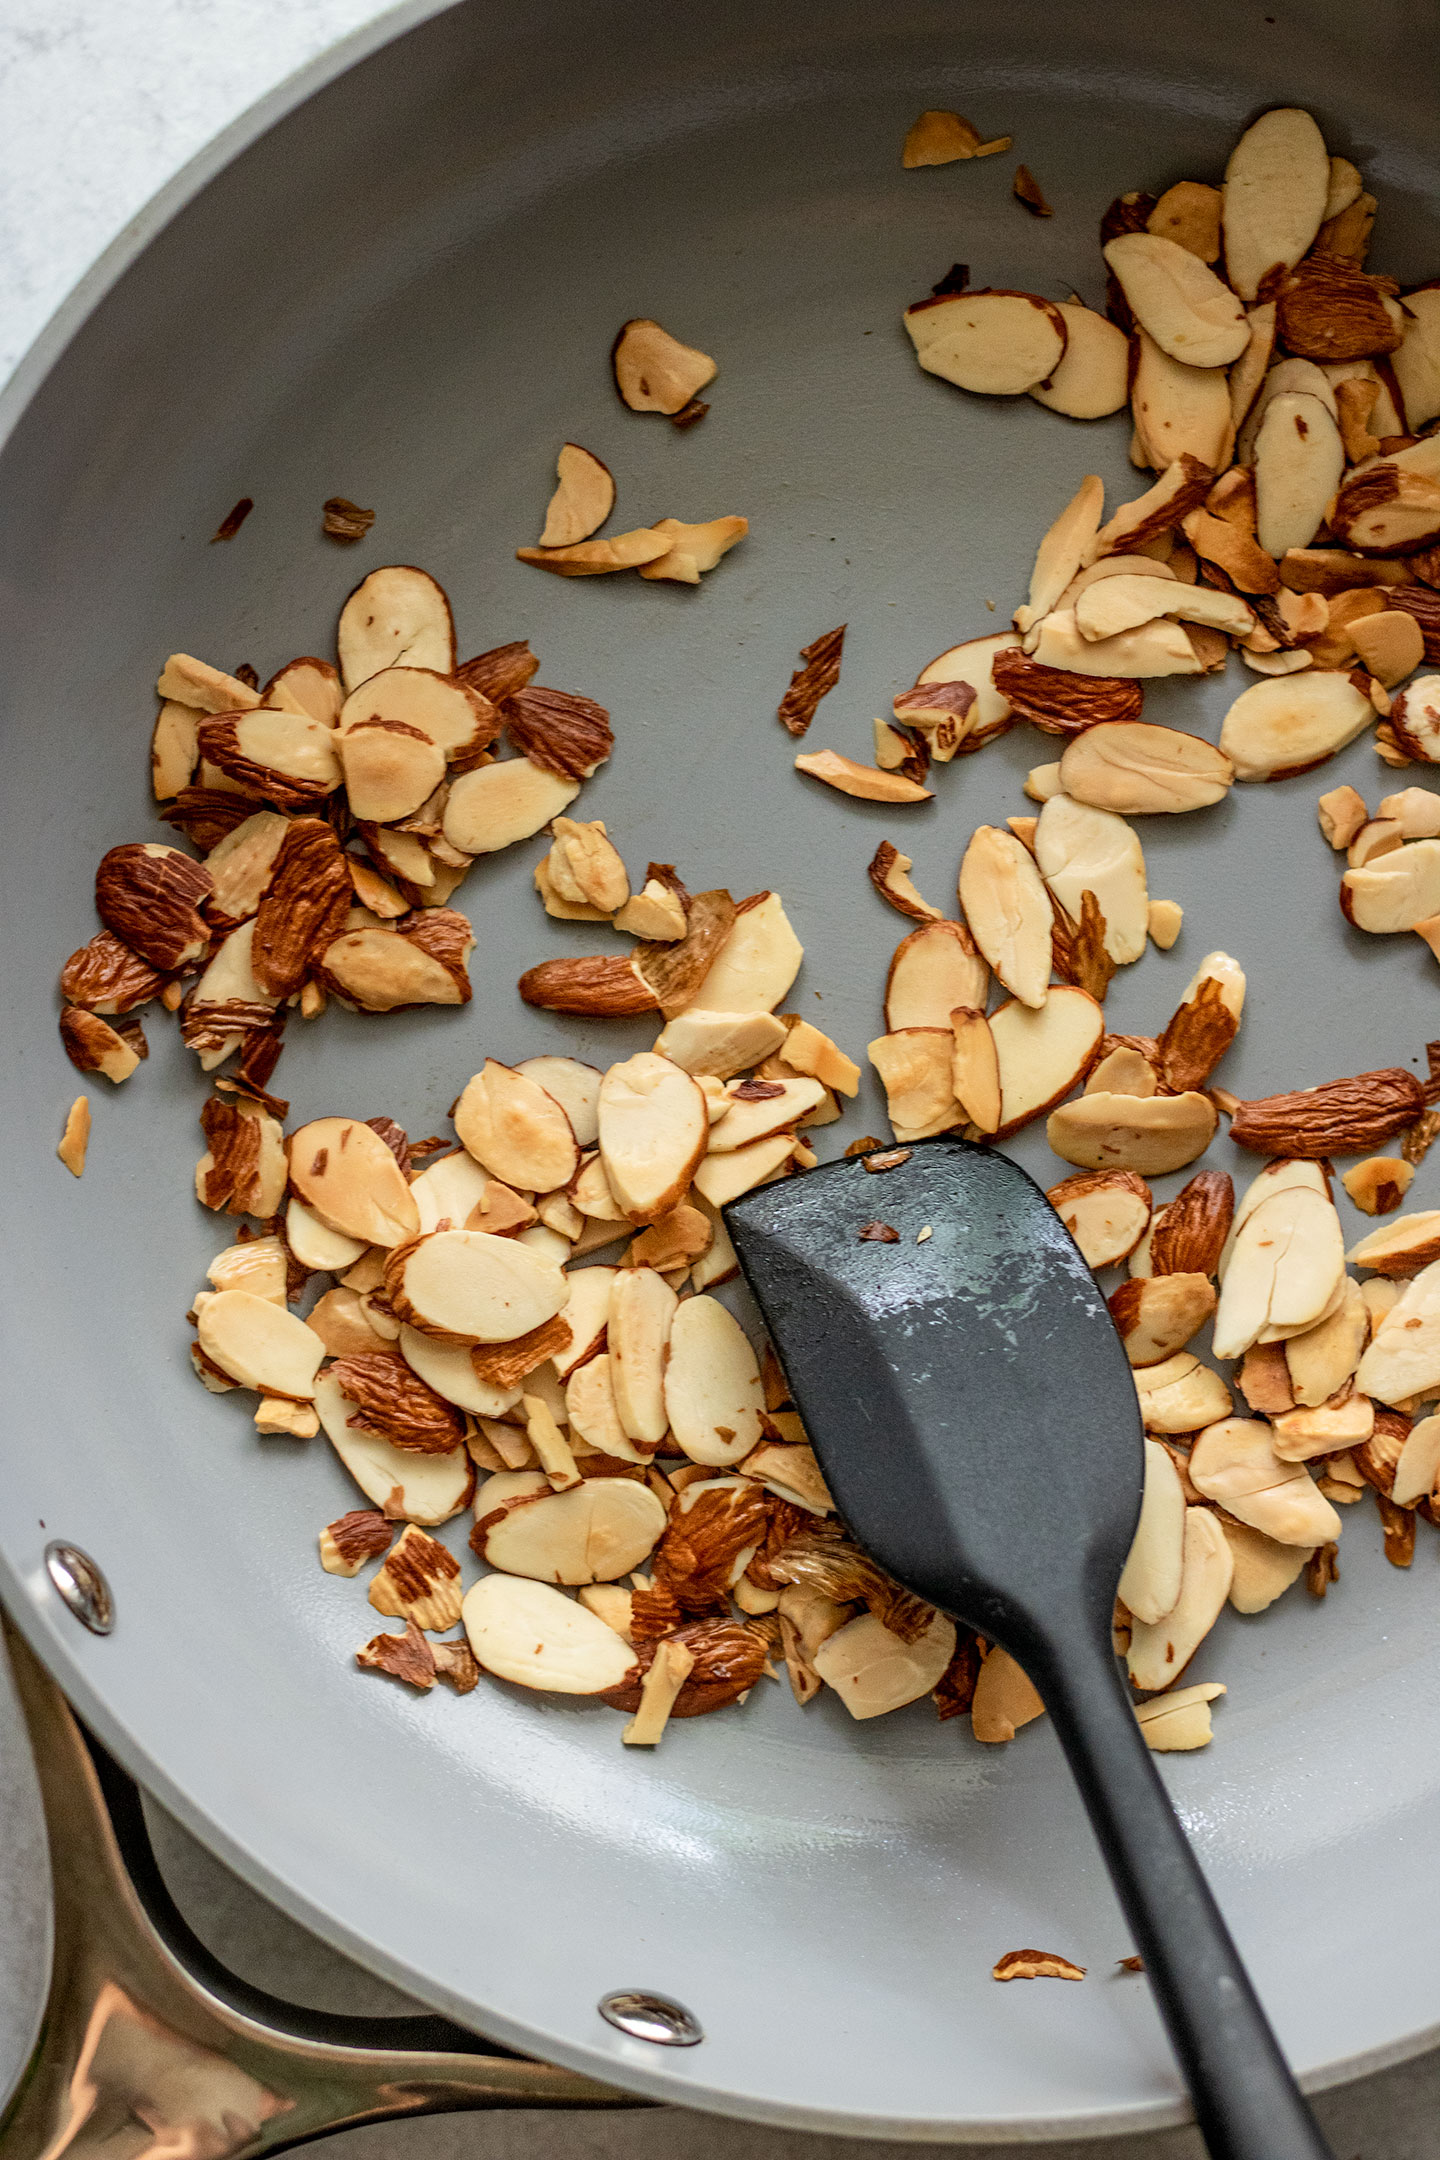 Toasting almonds in a pan.